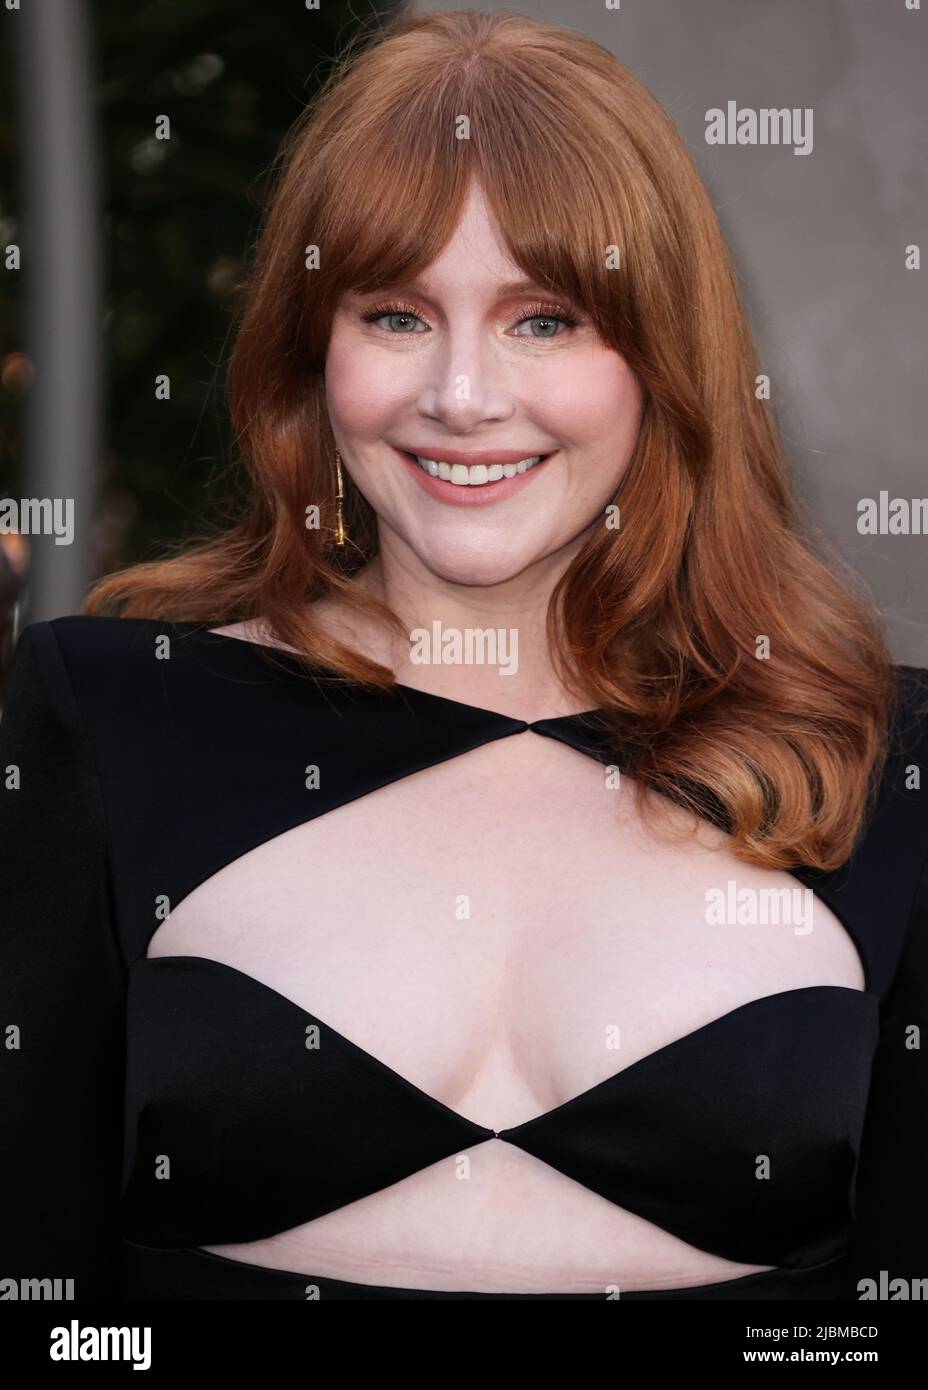 Hollywood, United States. 06th June, 2022. HOLLYWOOD, LOS ANGELES,  CALIFORNIA, USA - JUNE 06: American actress Bryce Dallas Howard wearing an  Alex Perry dress arrives at the Los Angeles Premiere Of Universal